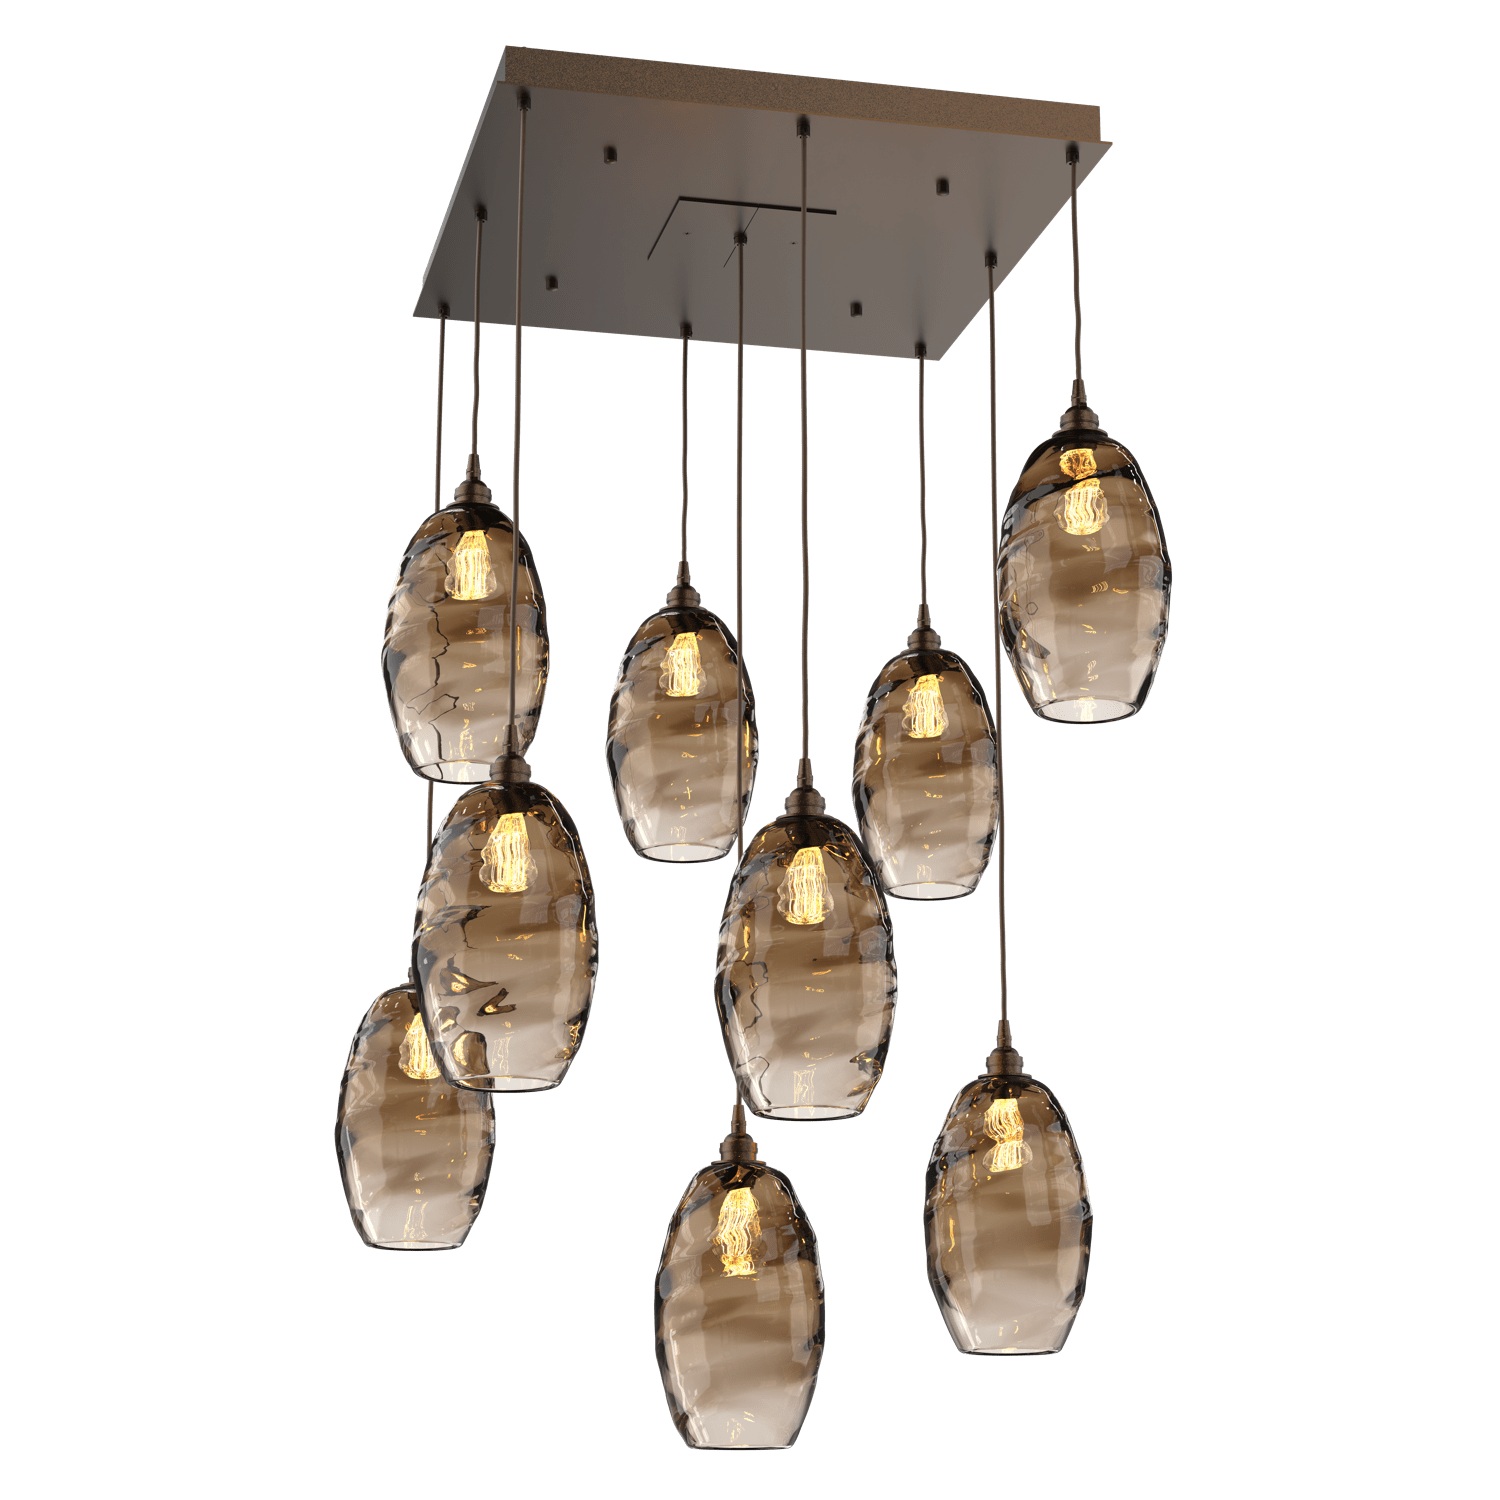 CHB0035-09-FB-OB-Hammerton-Studio-Optic-Blown-Glass-Elisse-9-light-square-pendant-chandelier-with-flat-bronze-finish-and-optic-bronze-blown-glass-shades-and-incandescent-lamping